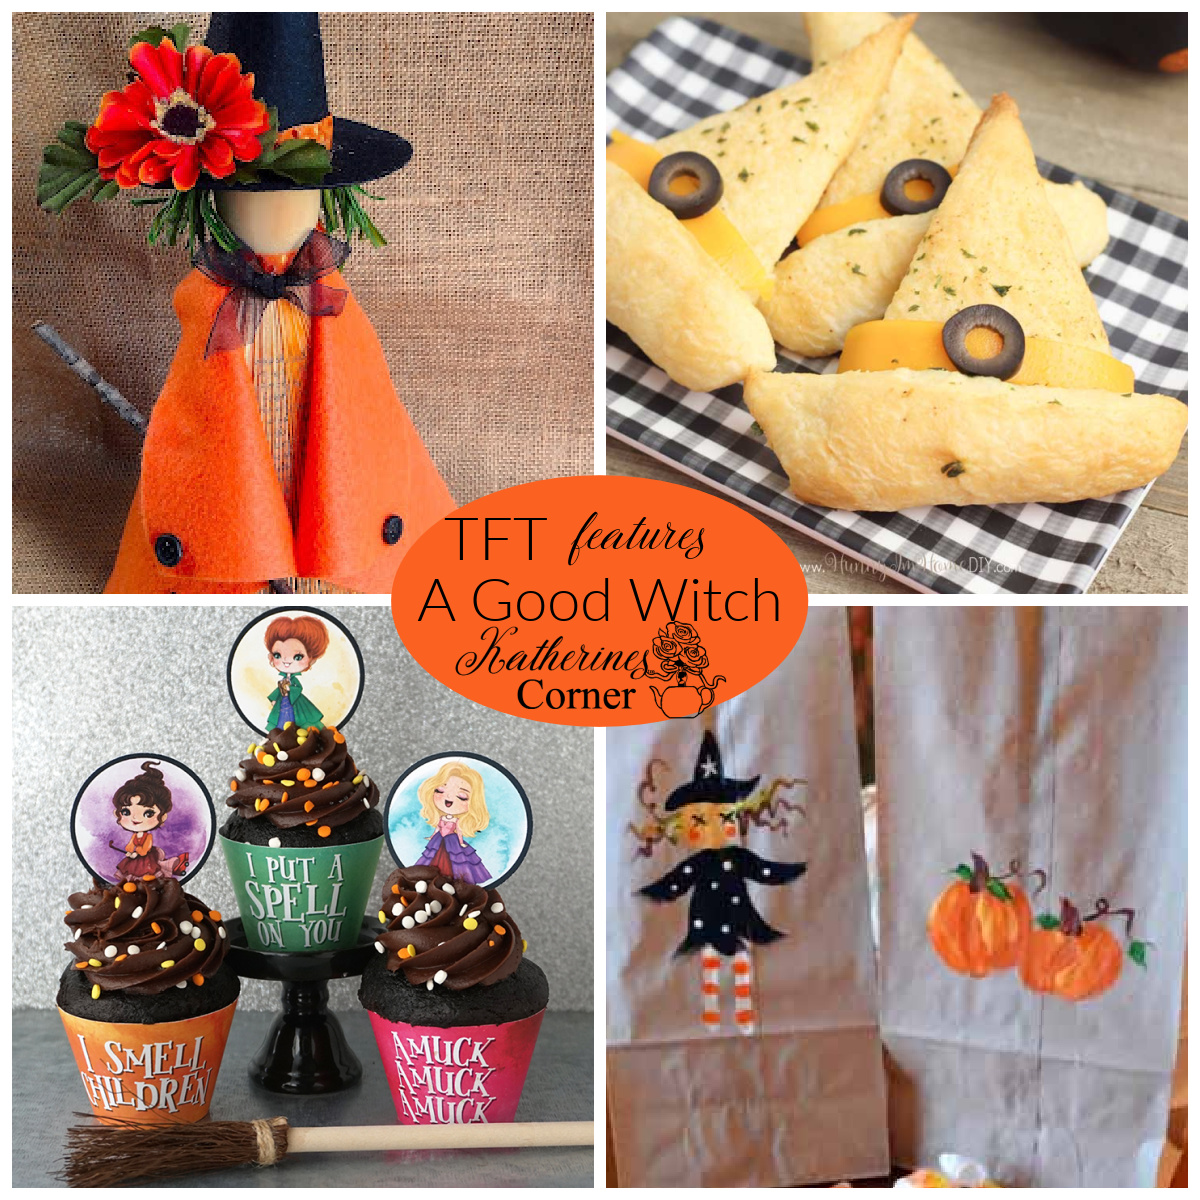 A Good Witch and the TFT Blog Hop